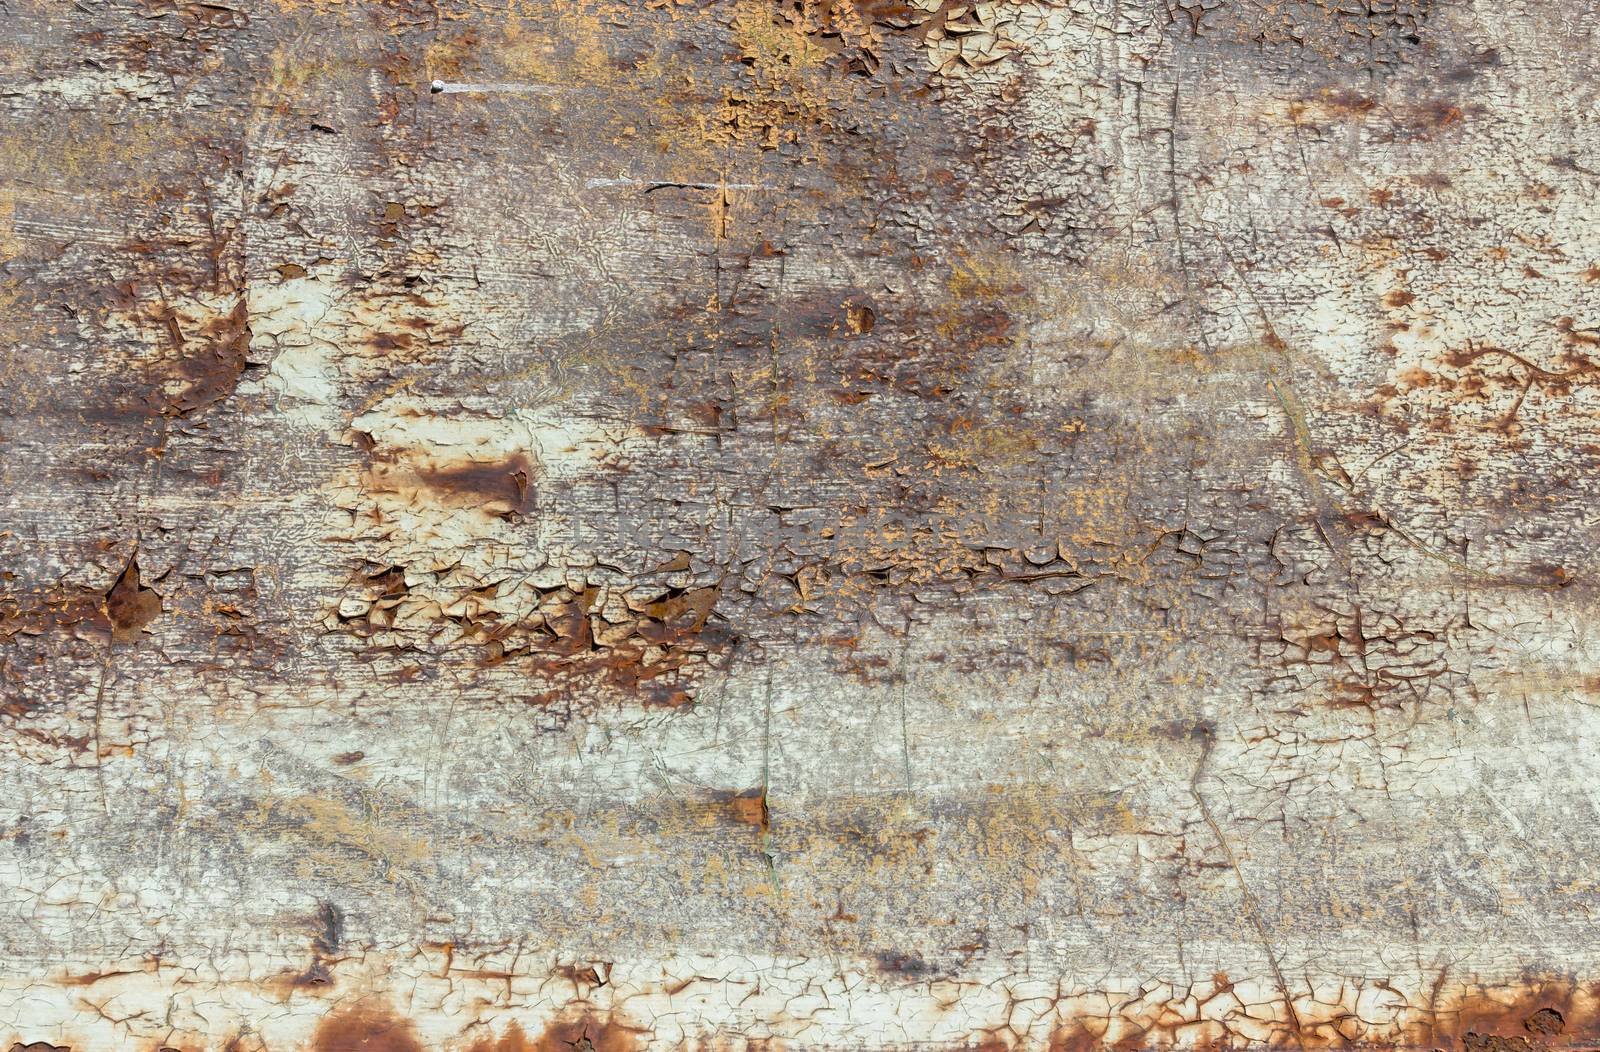 Abstract corroded colorful rusty metal background